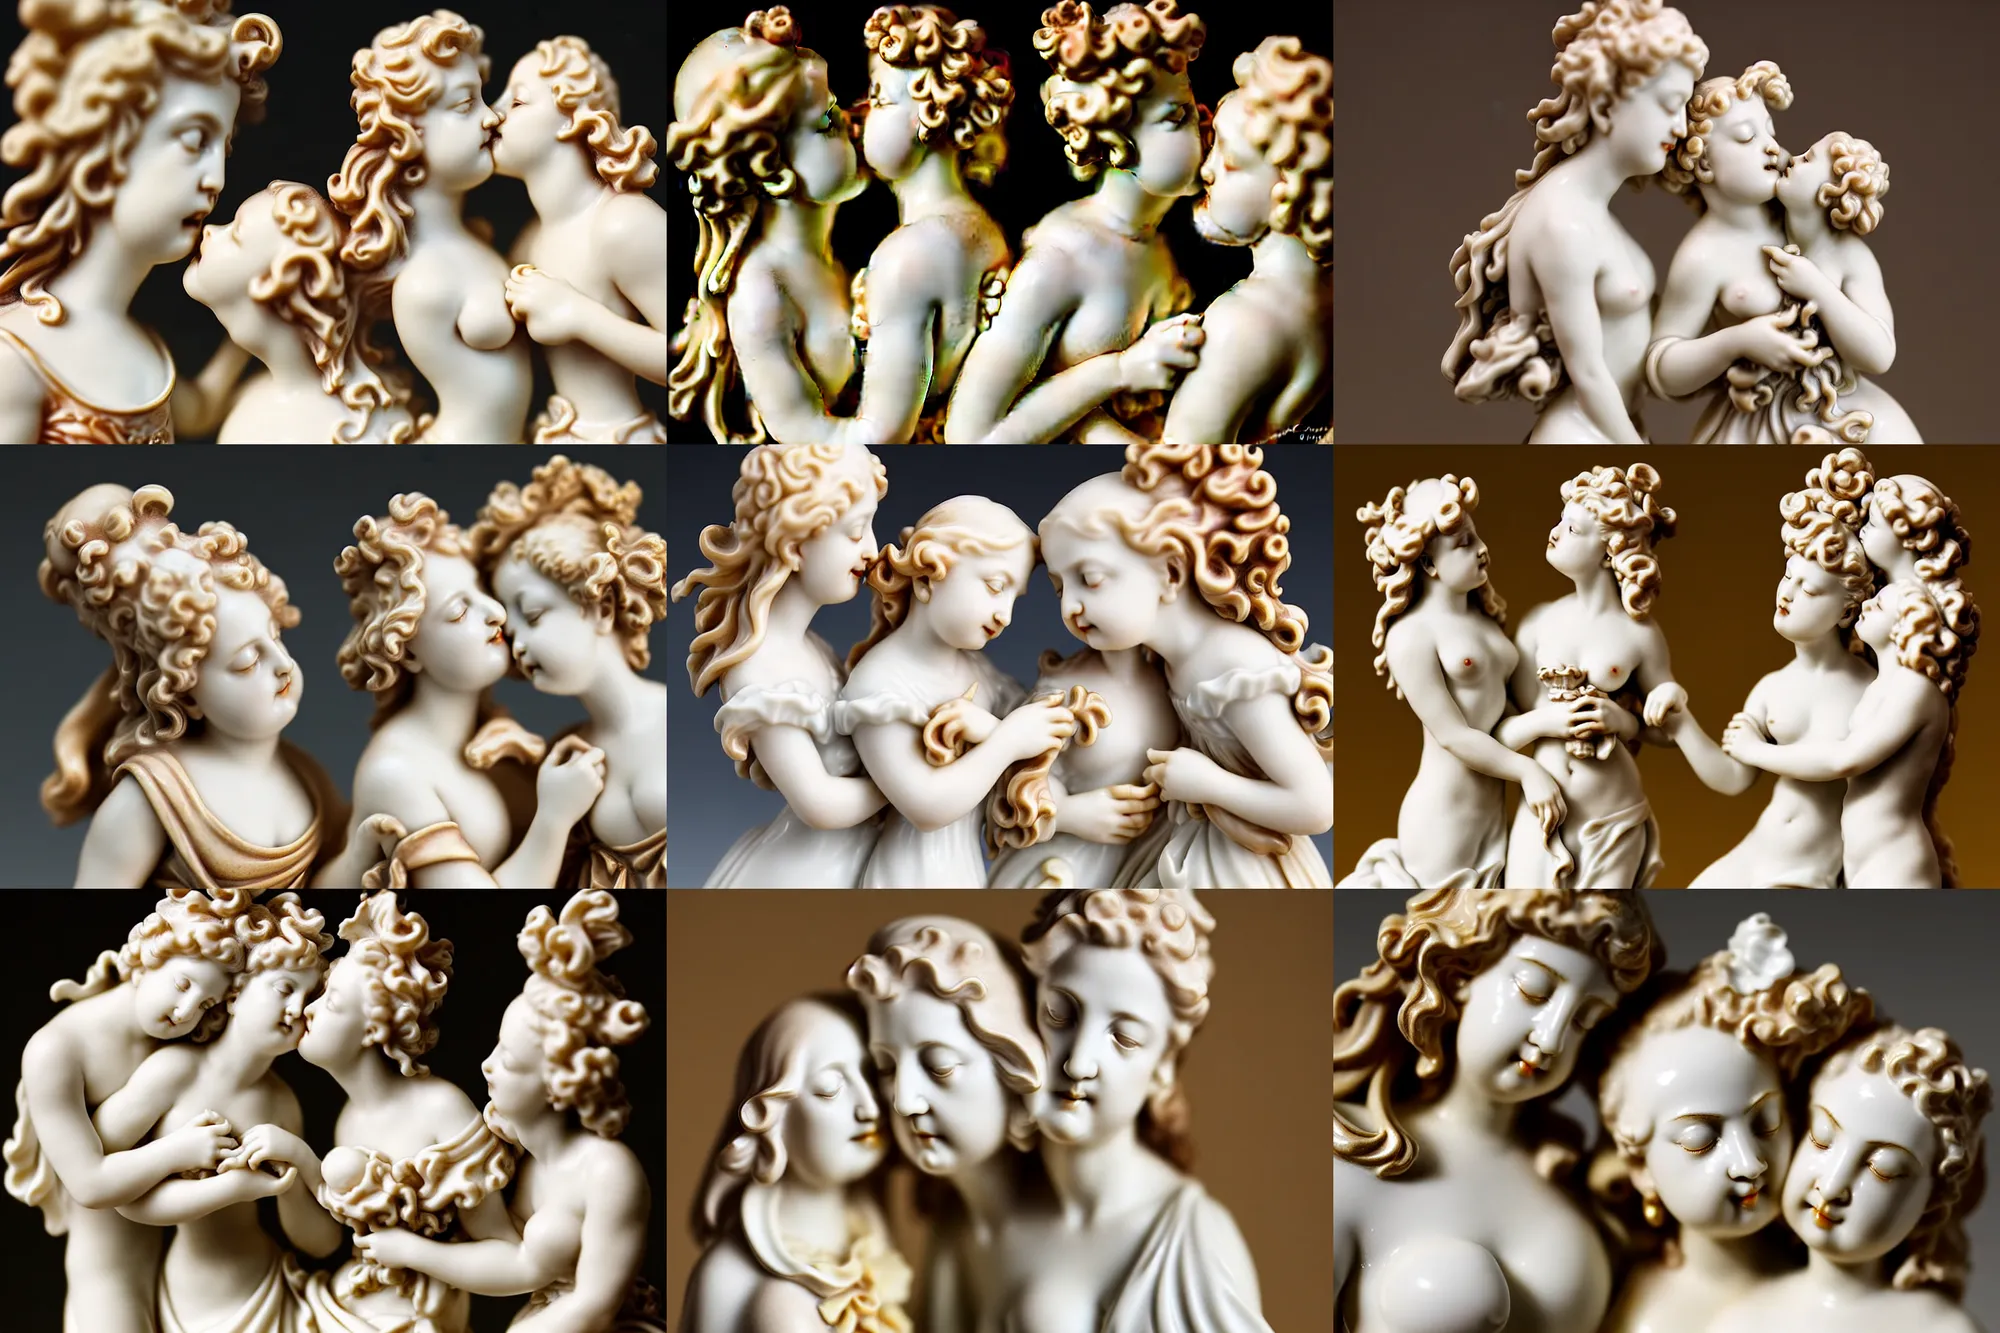 Prompt: A close up photo of porcelain composition of baroque figurines kissing, Tamron SP 90mm F/2.8 Di VC USD Macro